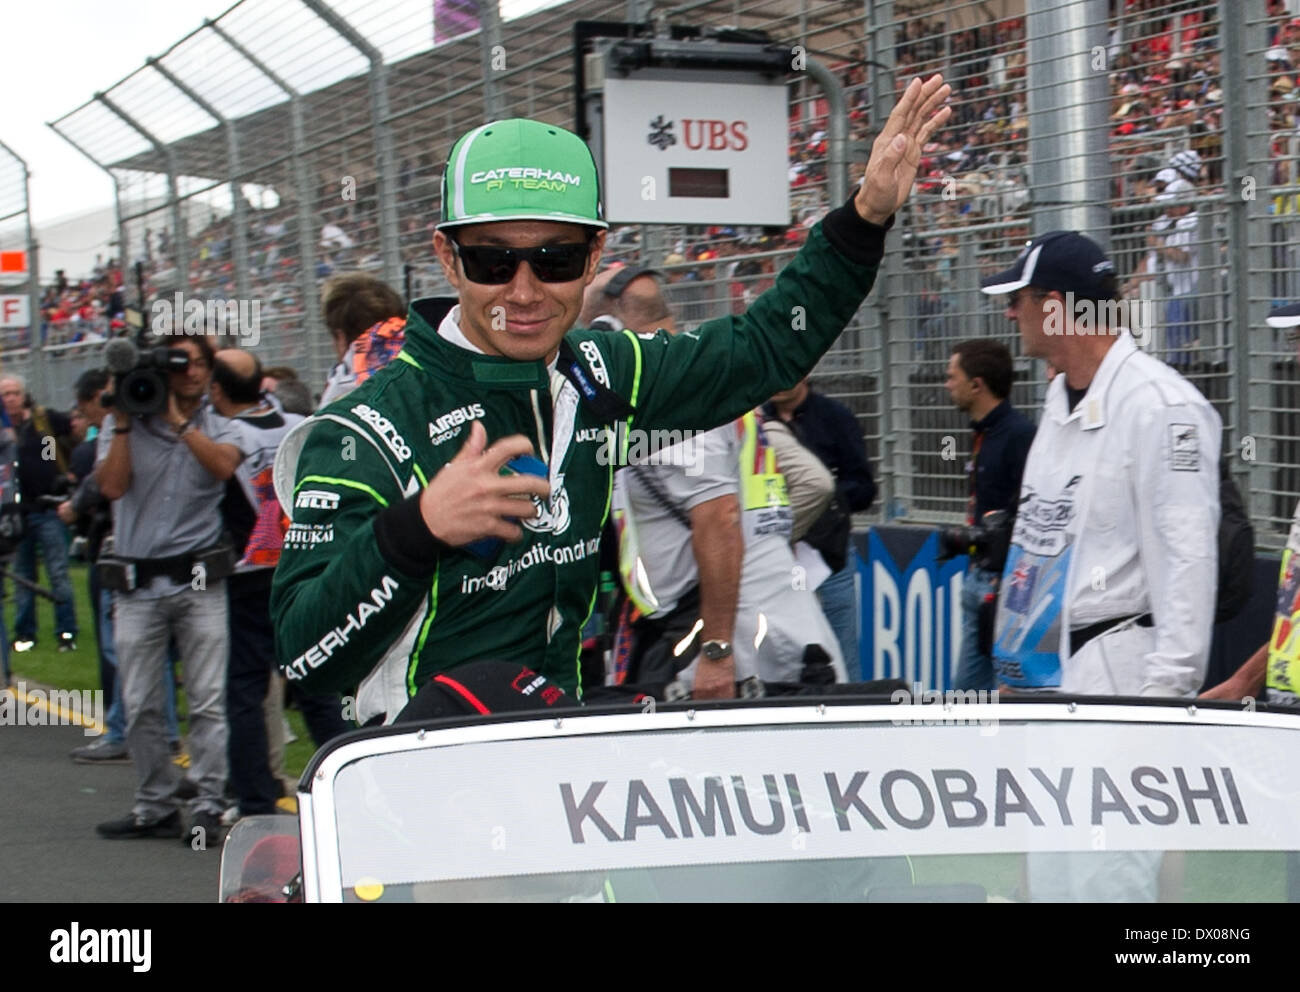 Melbourne, Australia. 16th Mar, 2014. Caterham Formula one driver Kamui Kobayashi of Japan takes selfies during the driver's parade before the Australian Formula One Grand Prix at the Albert Park circuit in Melbourne, Australia, March 16, 2014. Credit:  Bai Xue/Xinhua/Alamy Live News Stock Photo